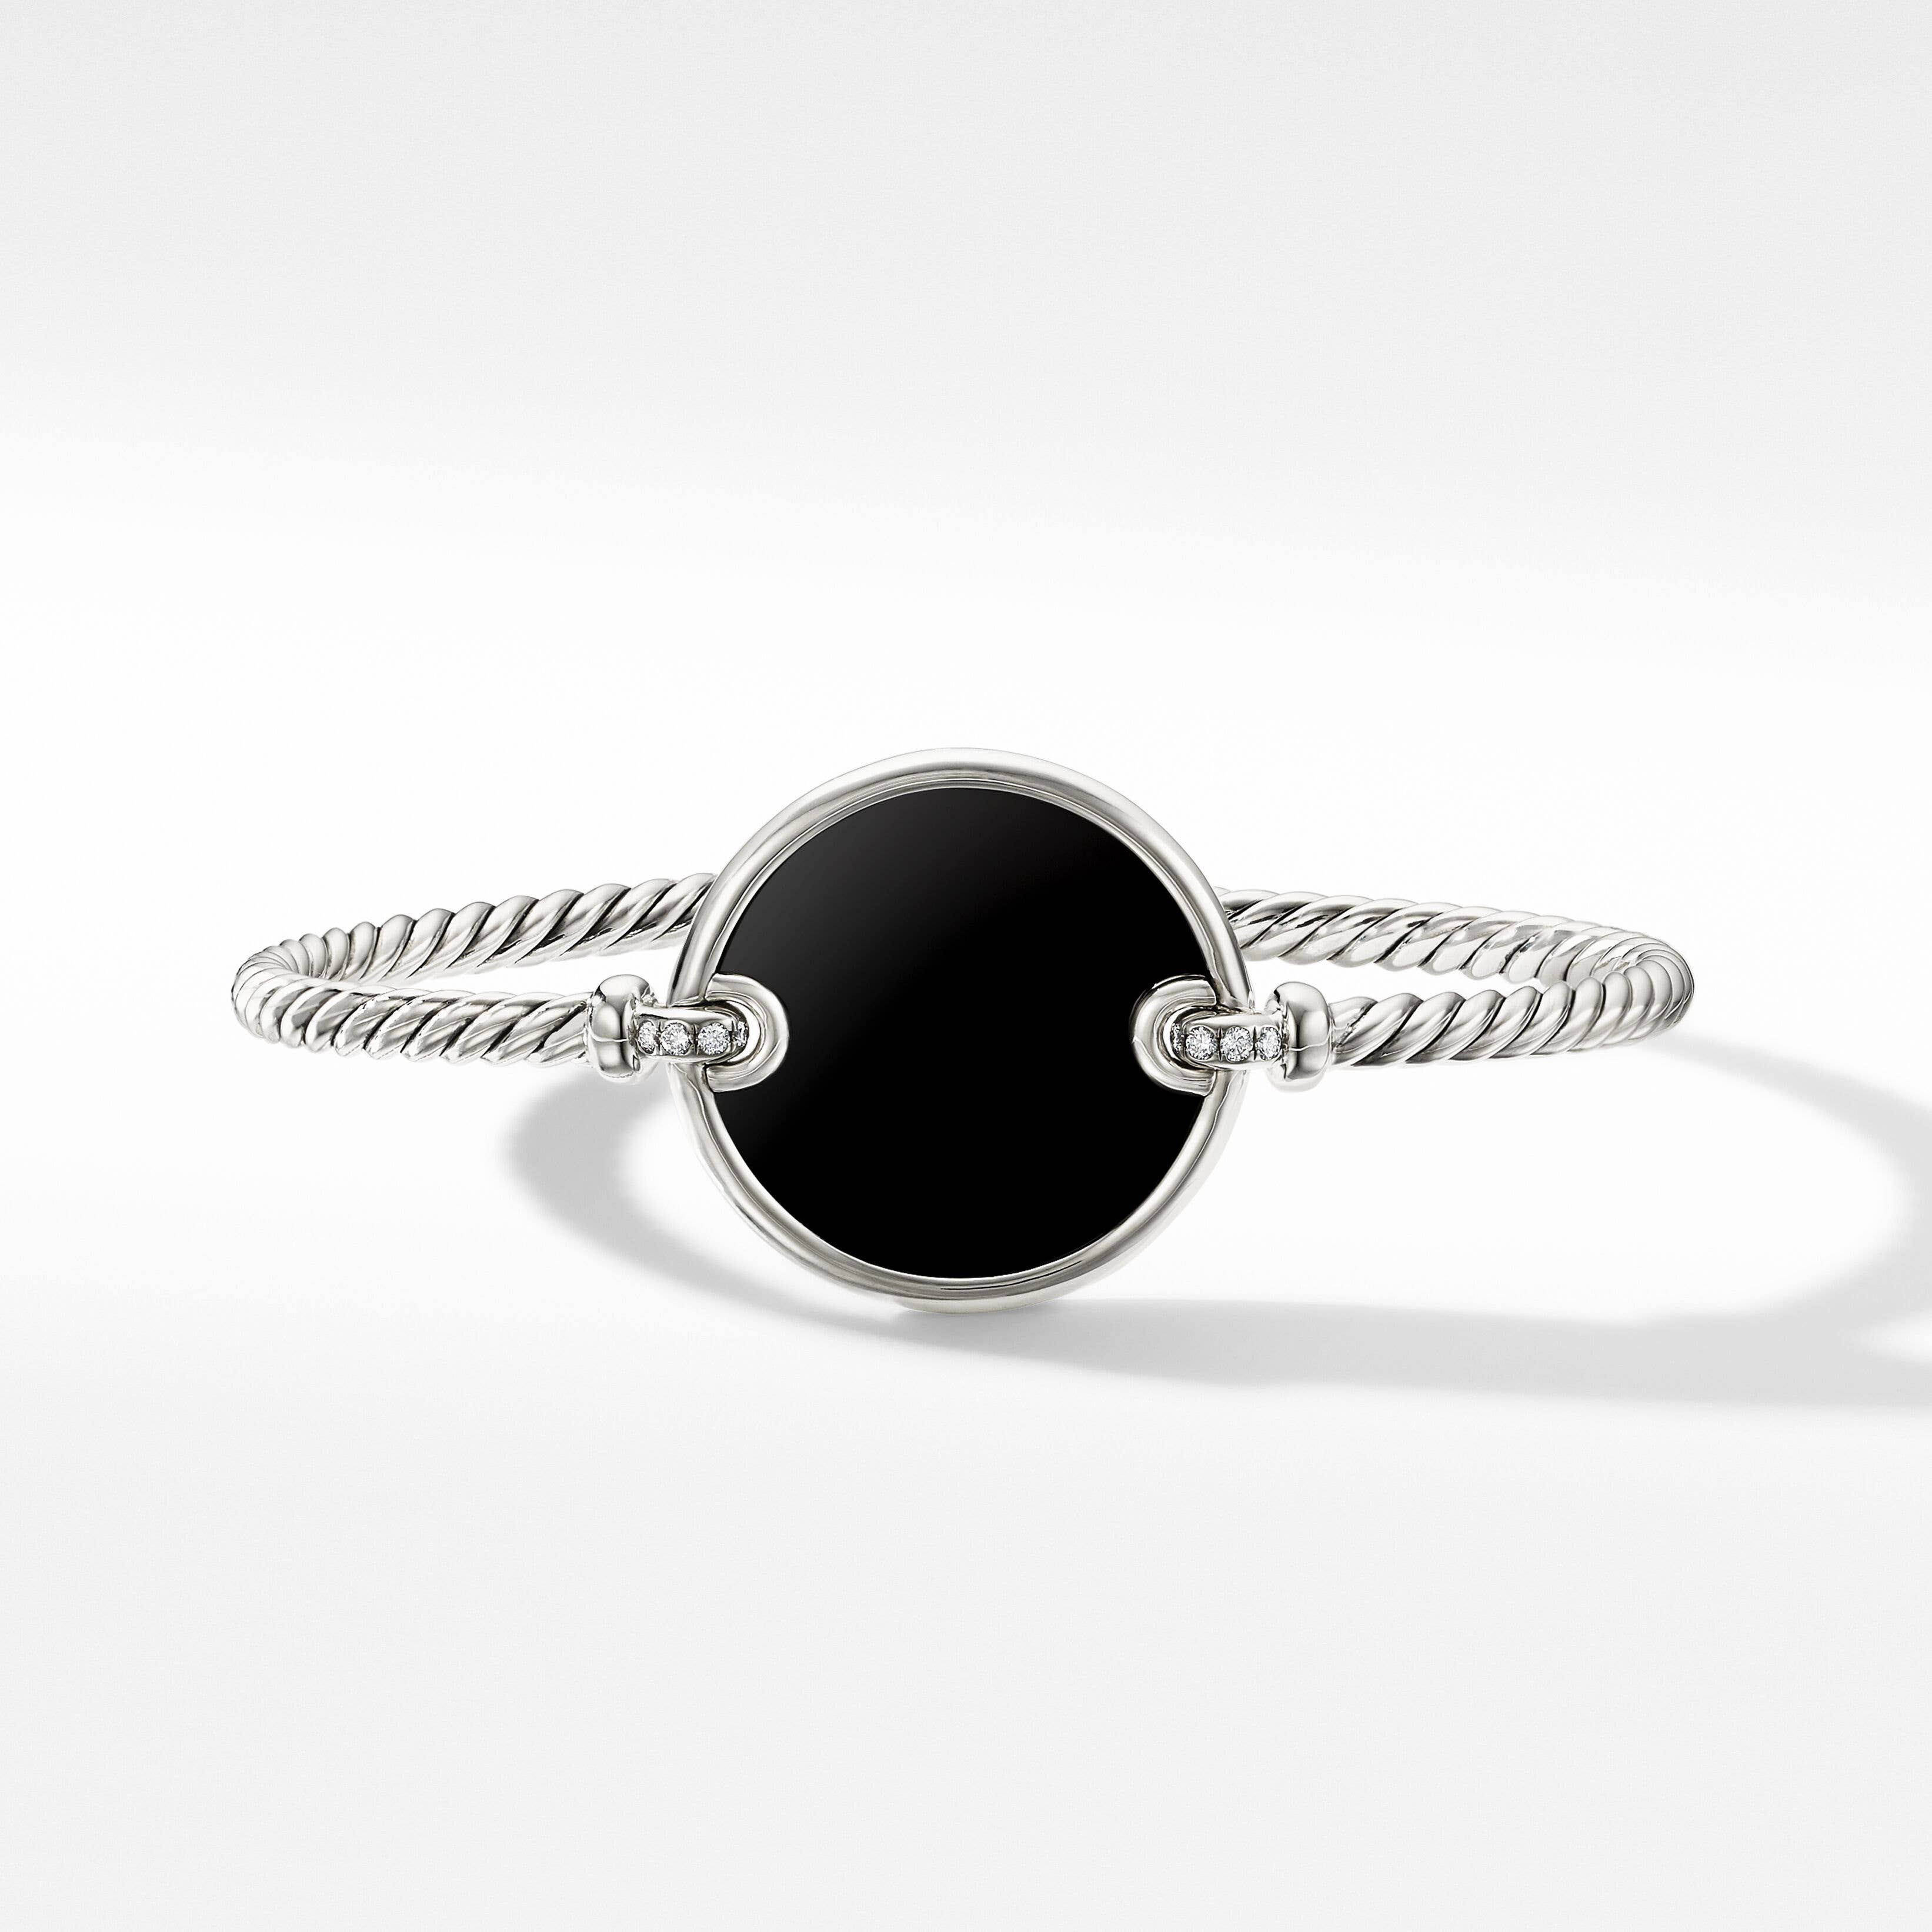 DY Elements® Bracelet in Sterling Silver with Black Onyx and Pavé Diamonds